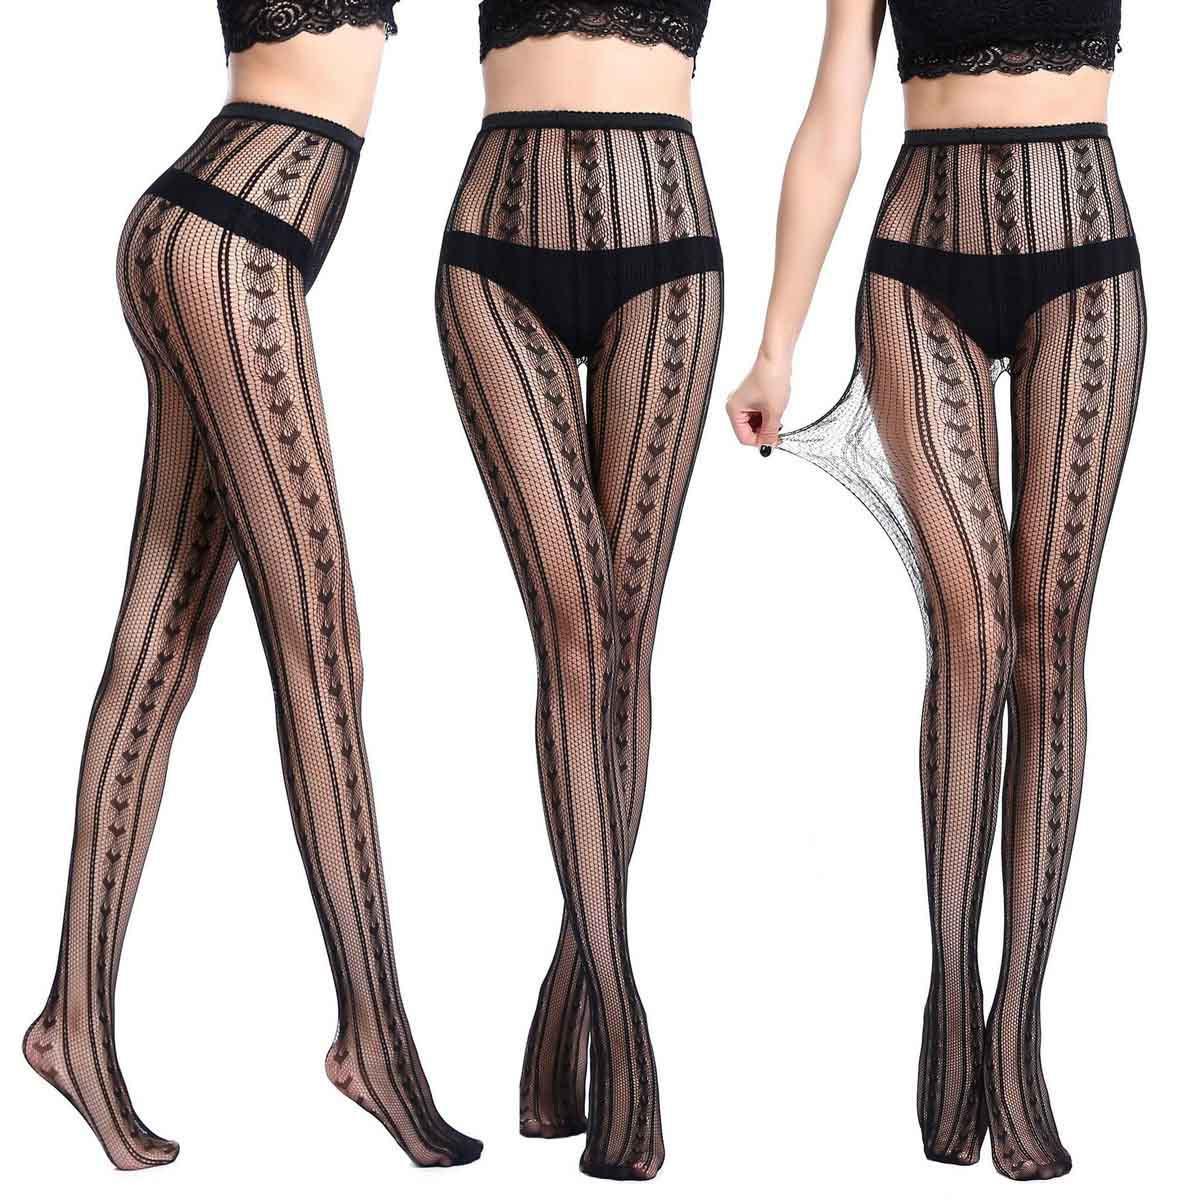 Fishnet Pantyhose Tights Patterned Stockings Waist High